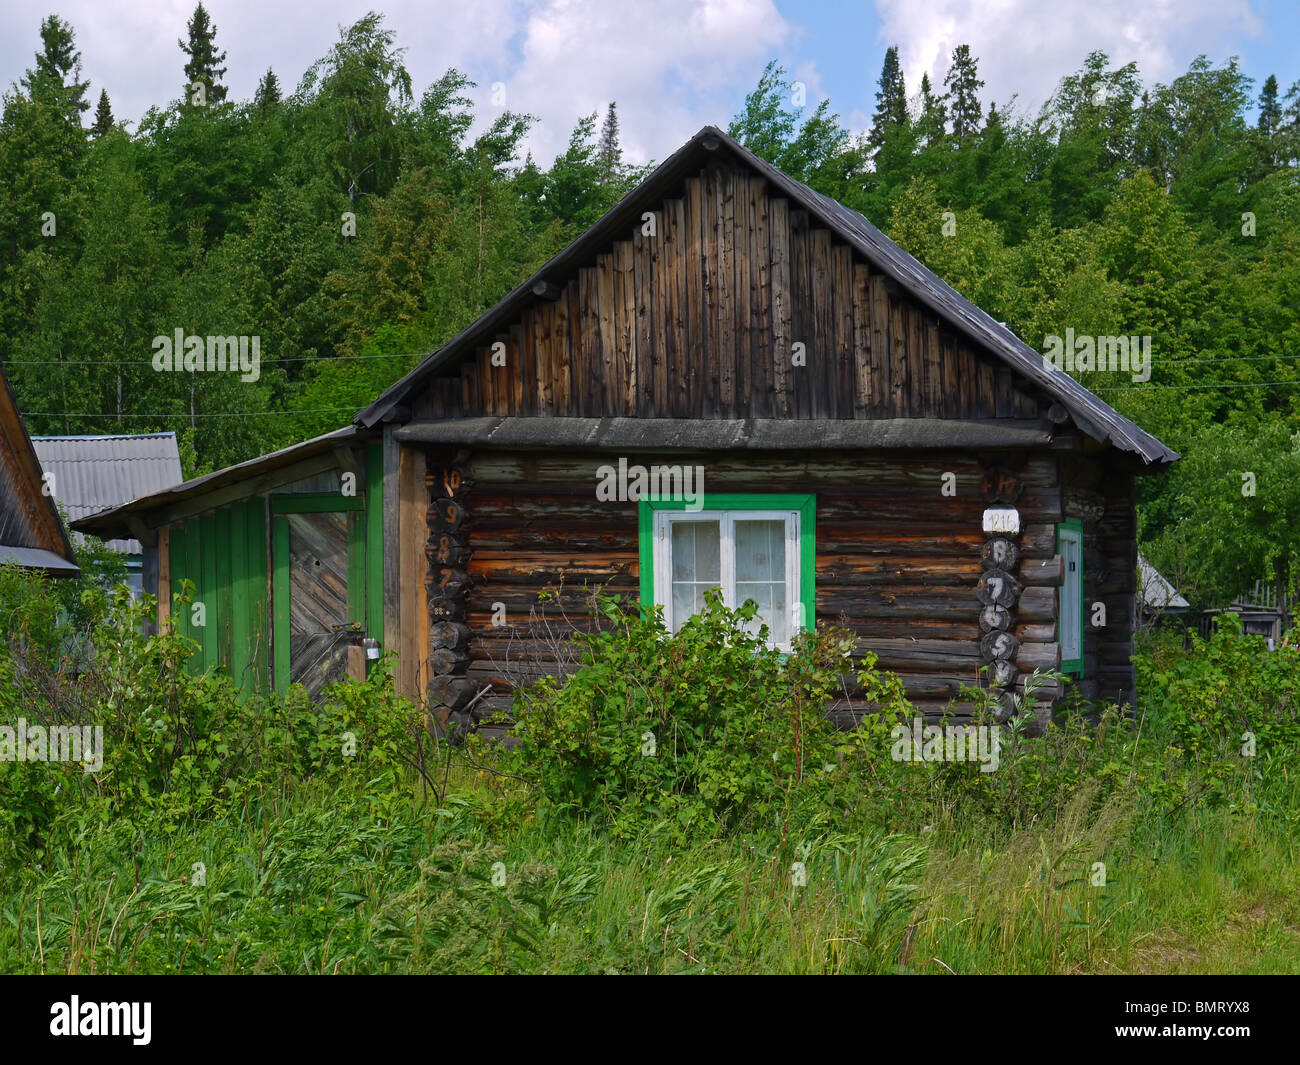 Small old wooden country house in Izhevsk region, Udmurt Republic, Russia Stock Photo